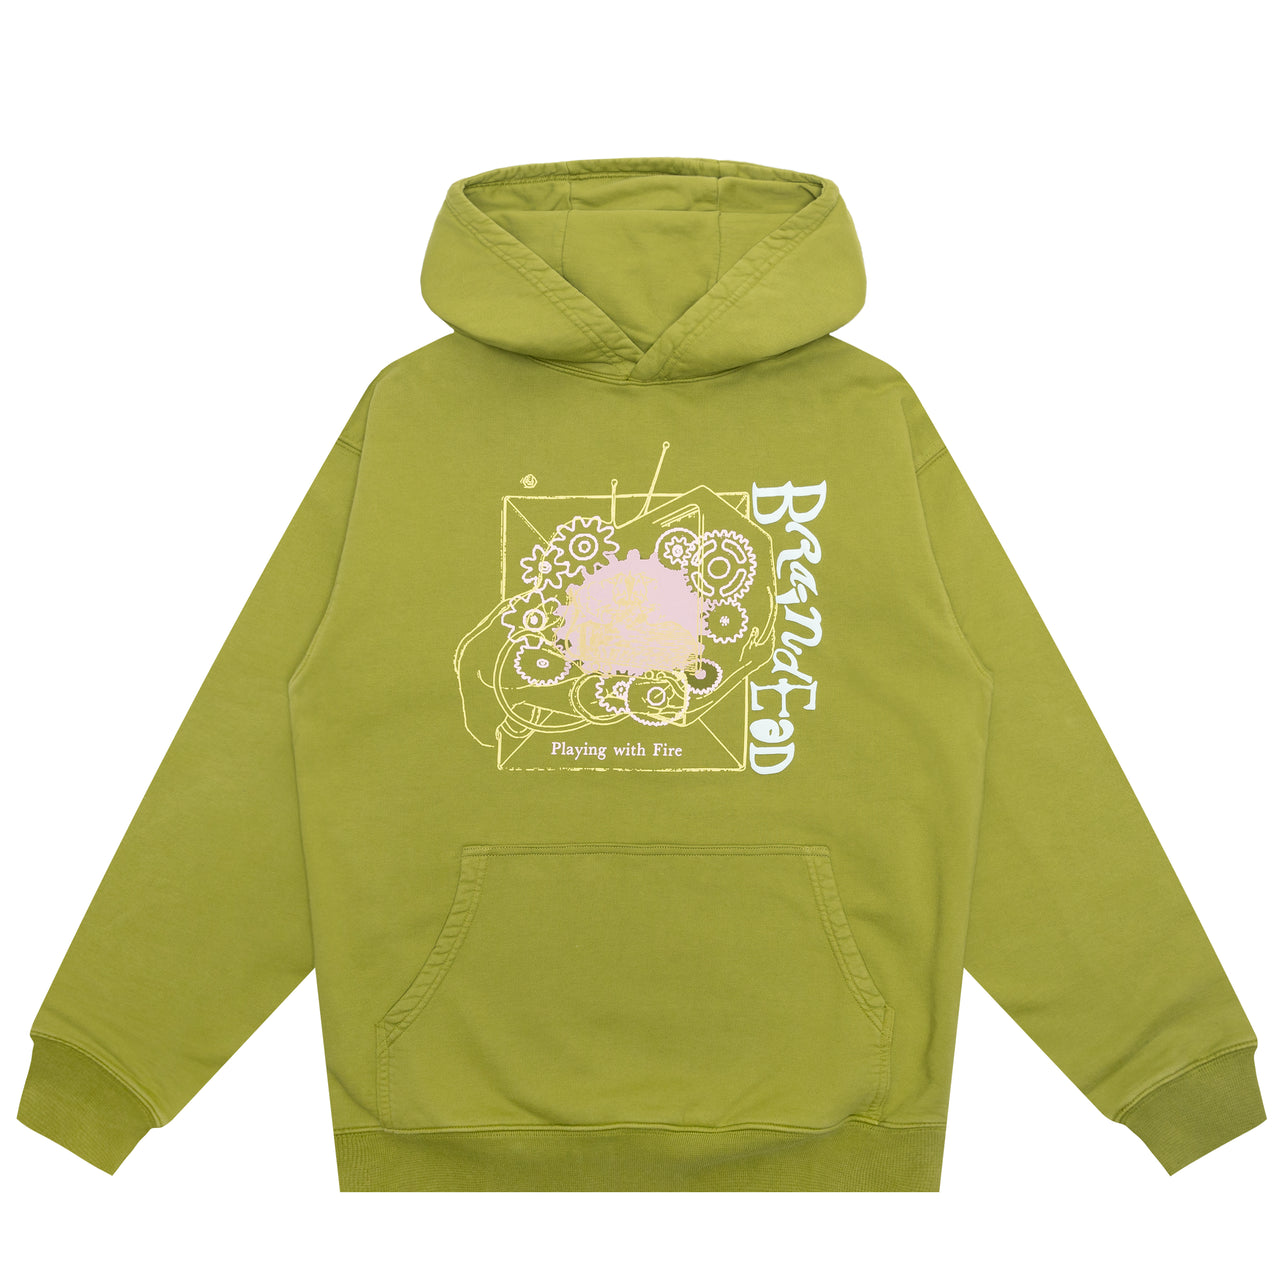 PLAYING WITH FIRE HOODIE